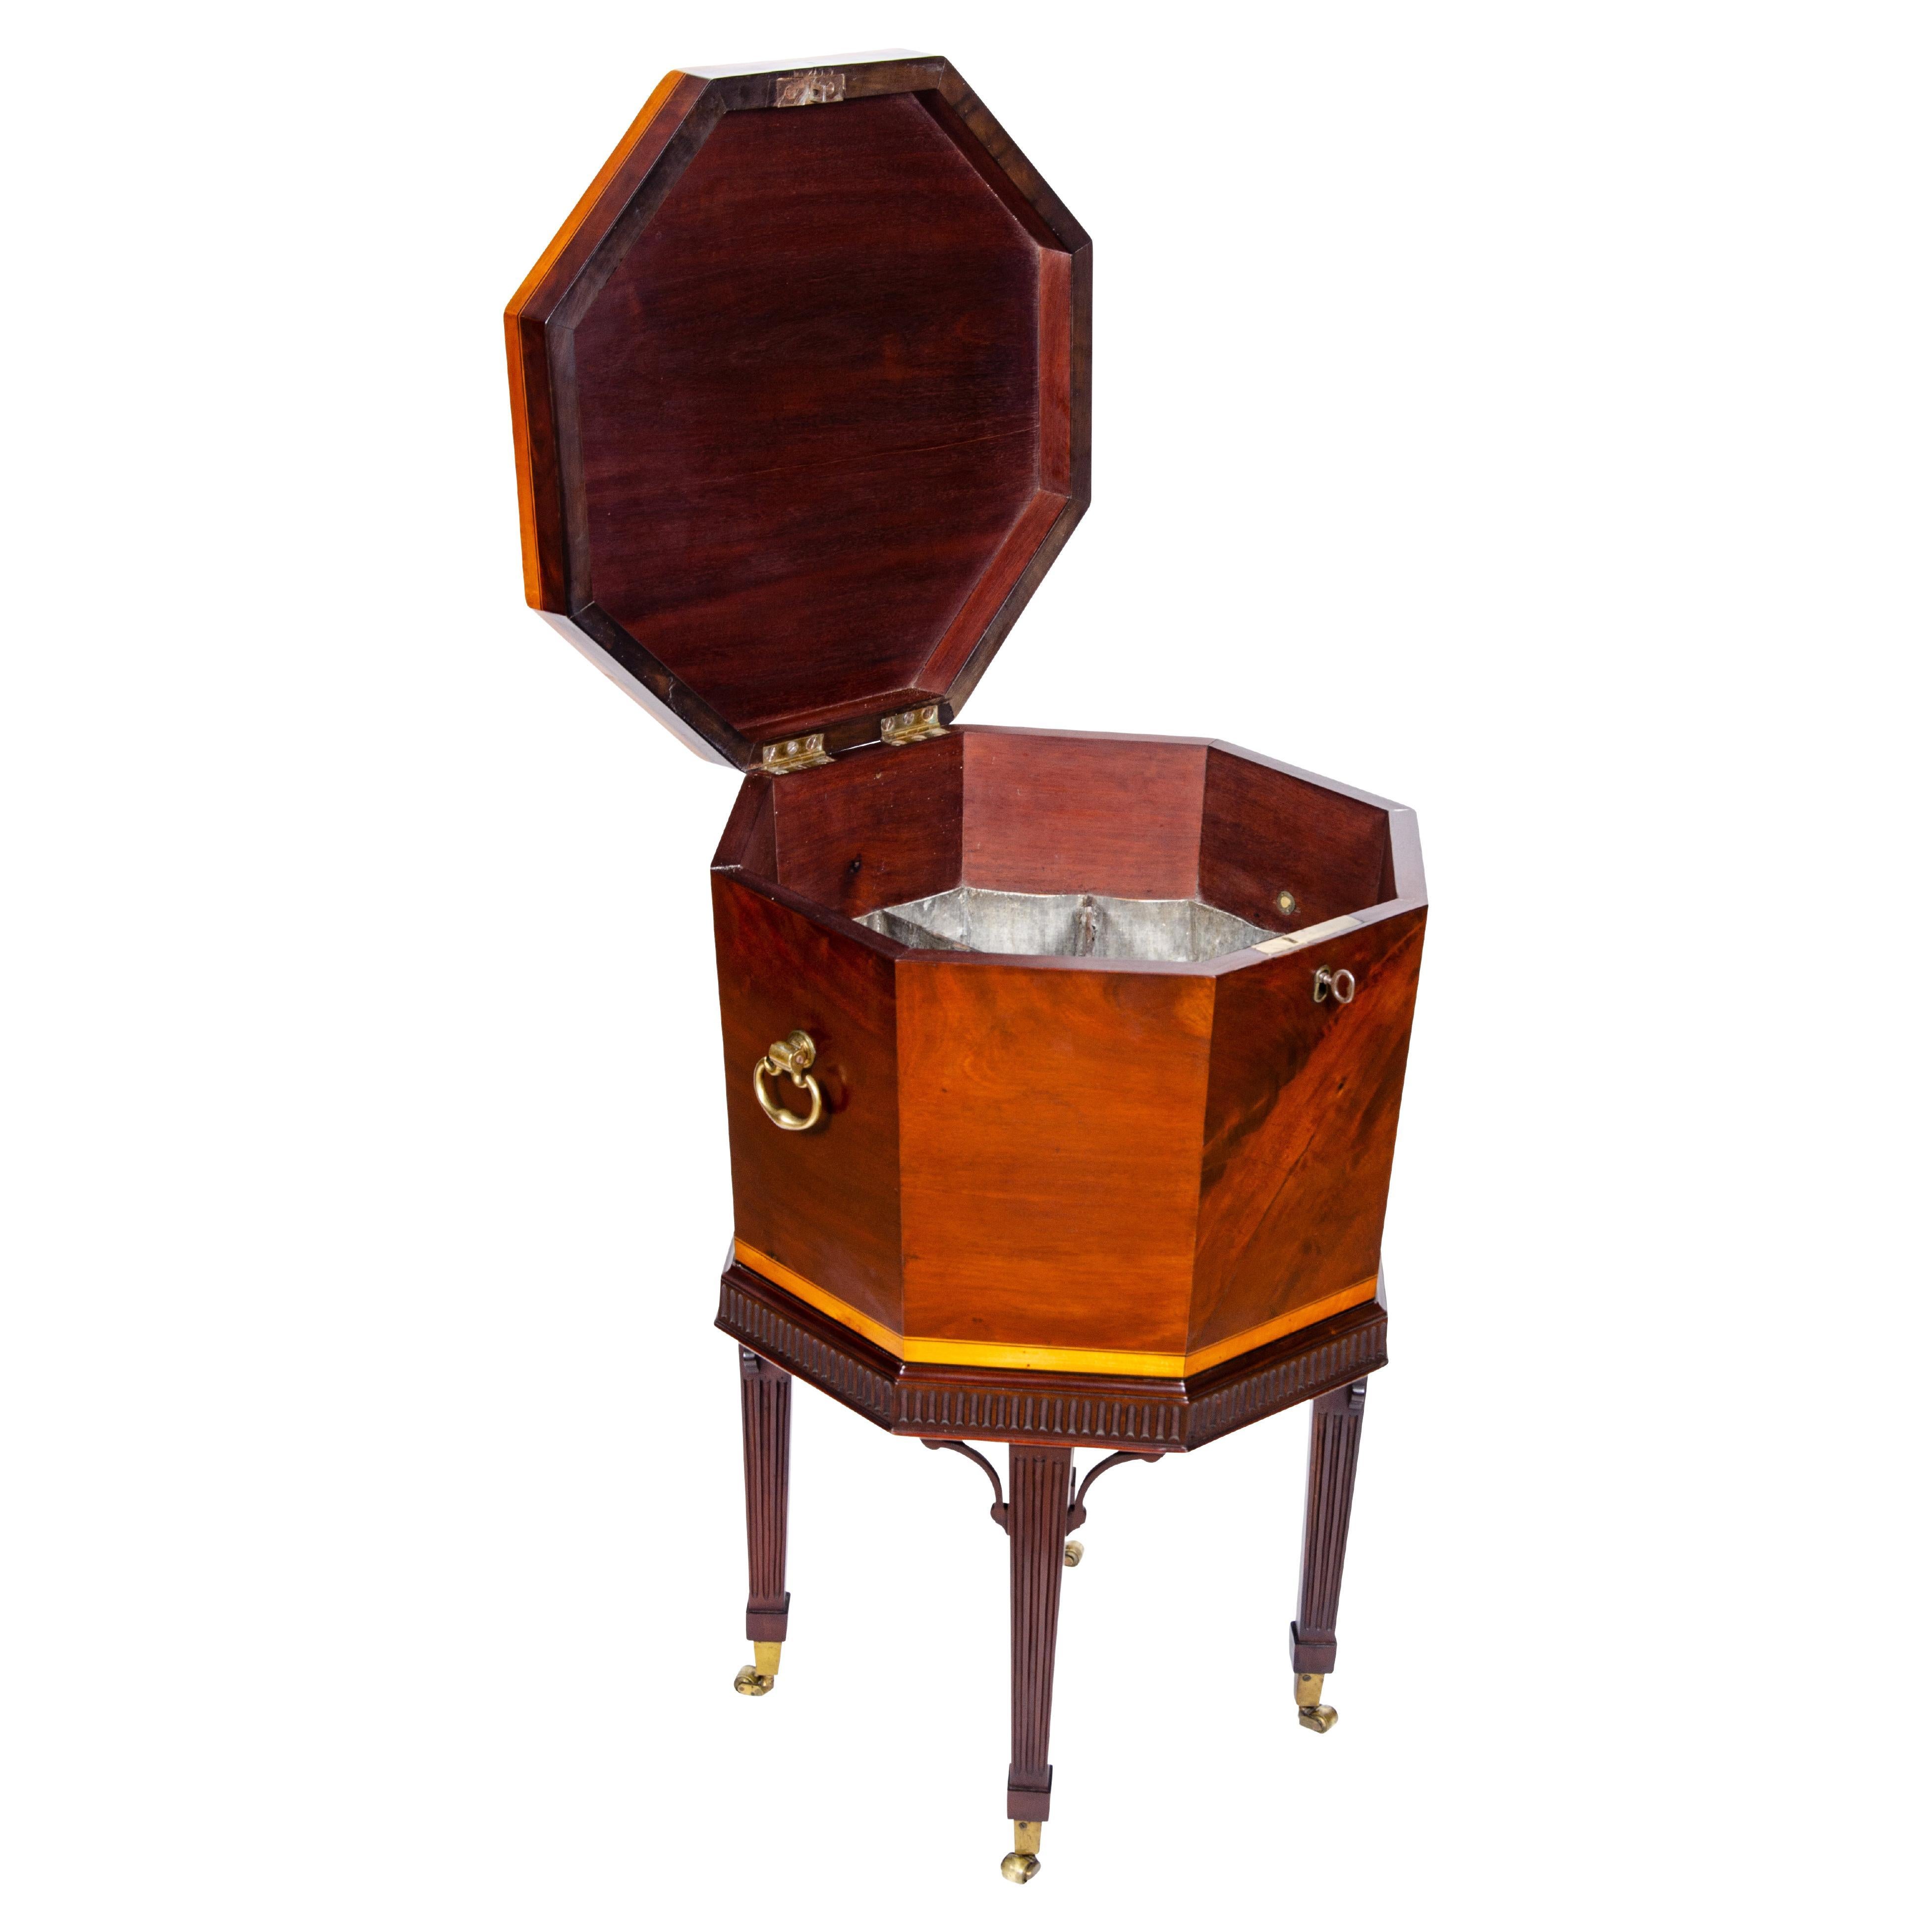 In very nice condition nicely French polished with fitted tin interior. Octagonal form with satinwood banding and central circular fan inlay. Hinged top. The base with reeded frieze and tapered reeded legs and casters.